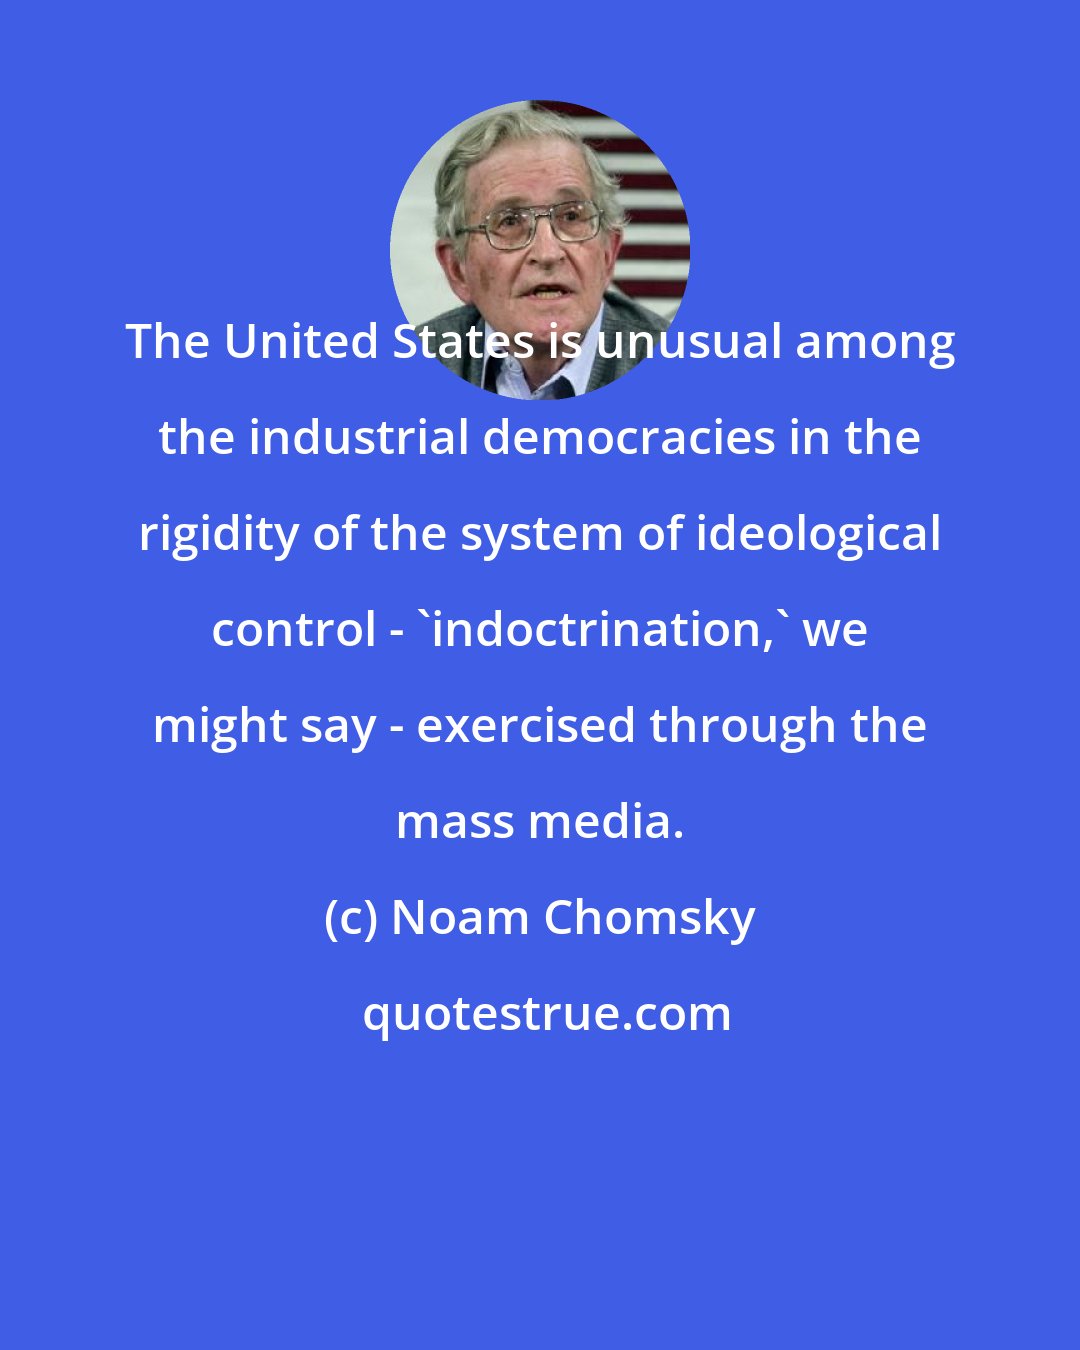 Noam Chomsky: The United States is unusual among the industrial democracies in the rigidity of the system of ideological control - 'indoctrination,' we might say - exercised through the mass media.